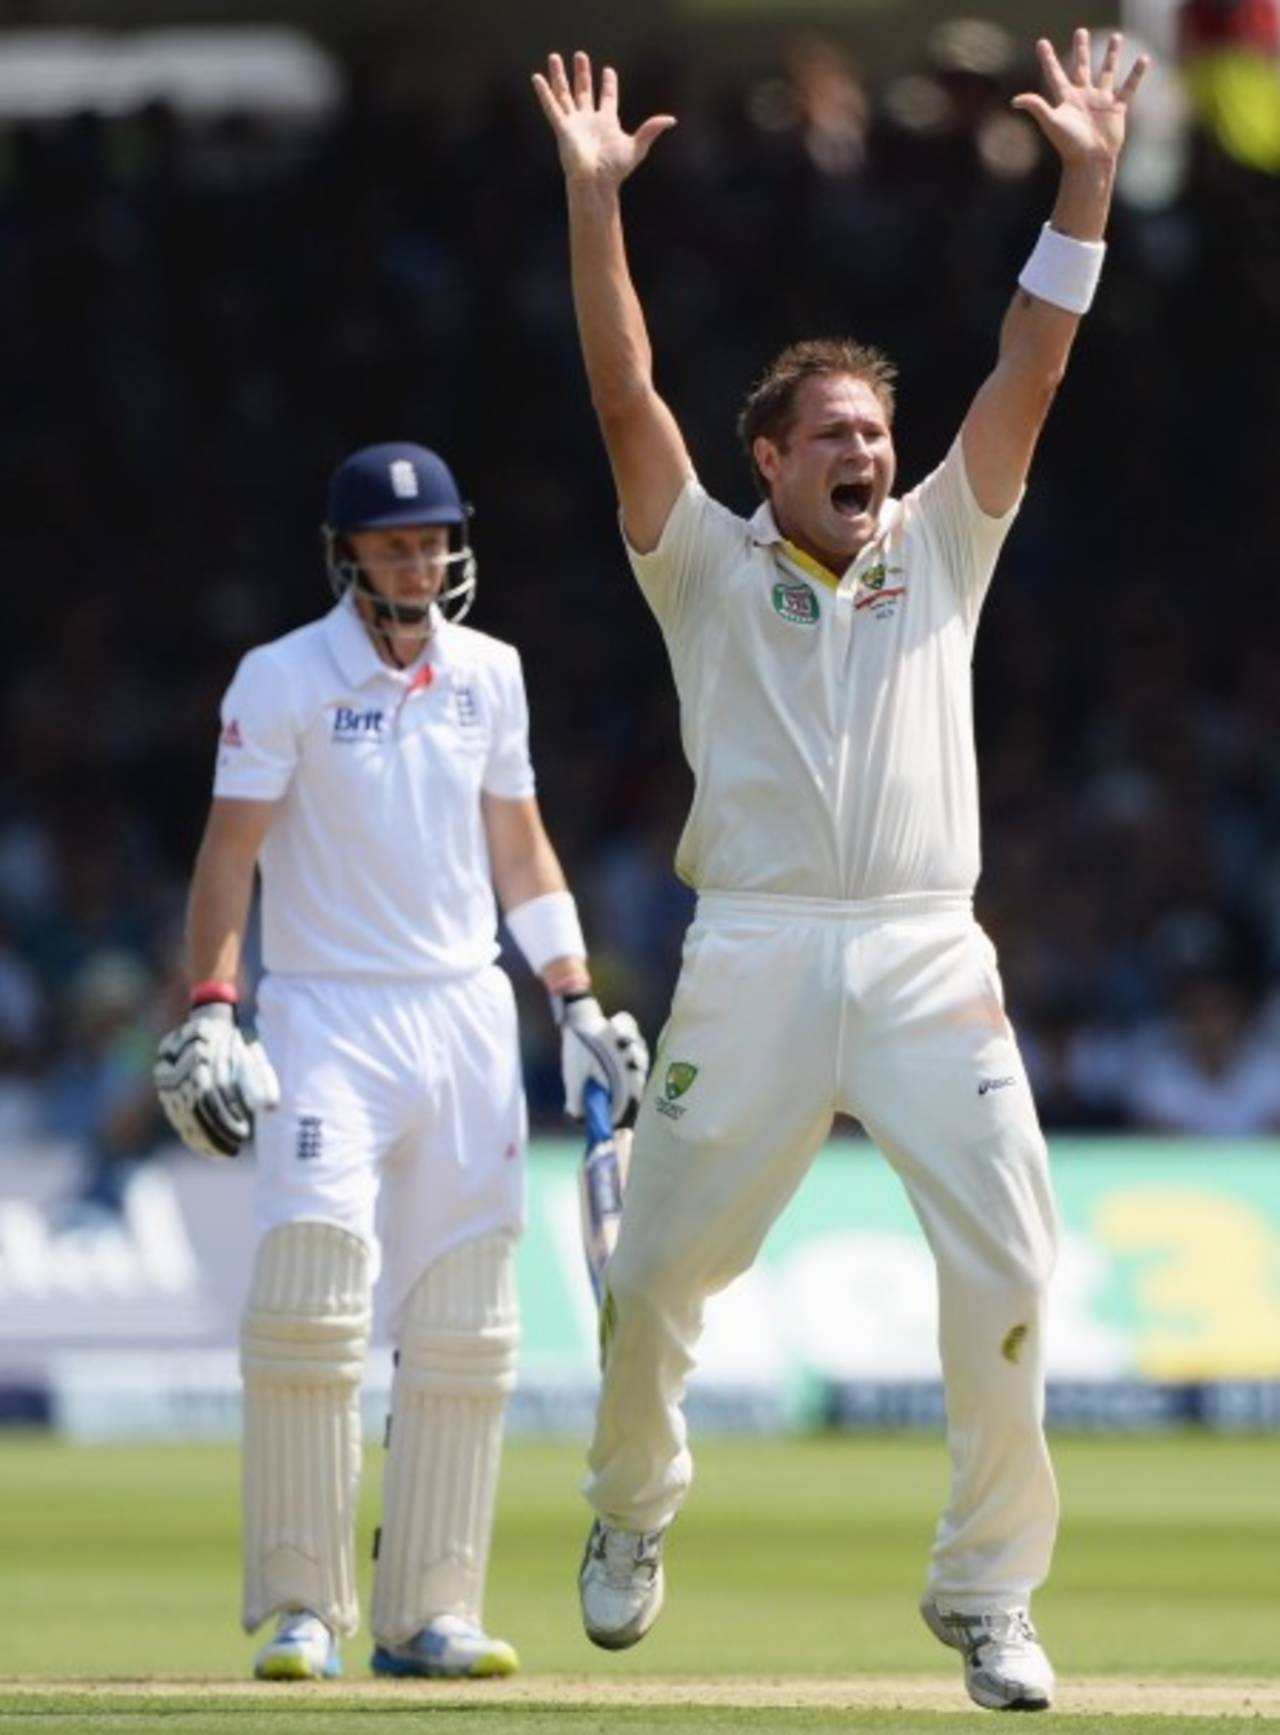 Ryan Harris appeals for the wicket of Joe Root, England v Australia, 2nd Investec Ashes Test, Lord's, 1st day, July 18, 2013